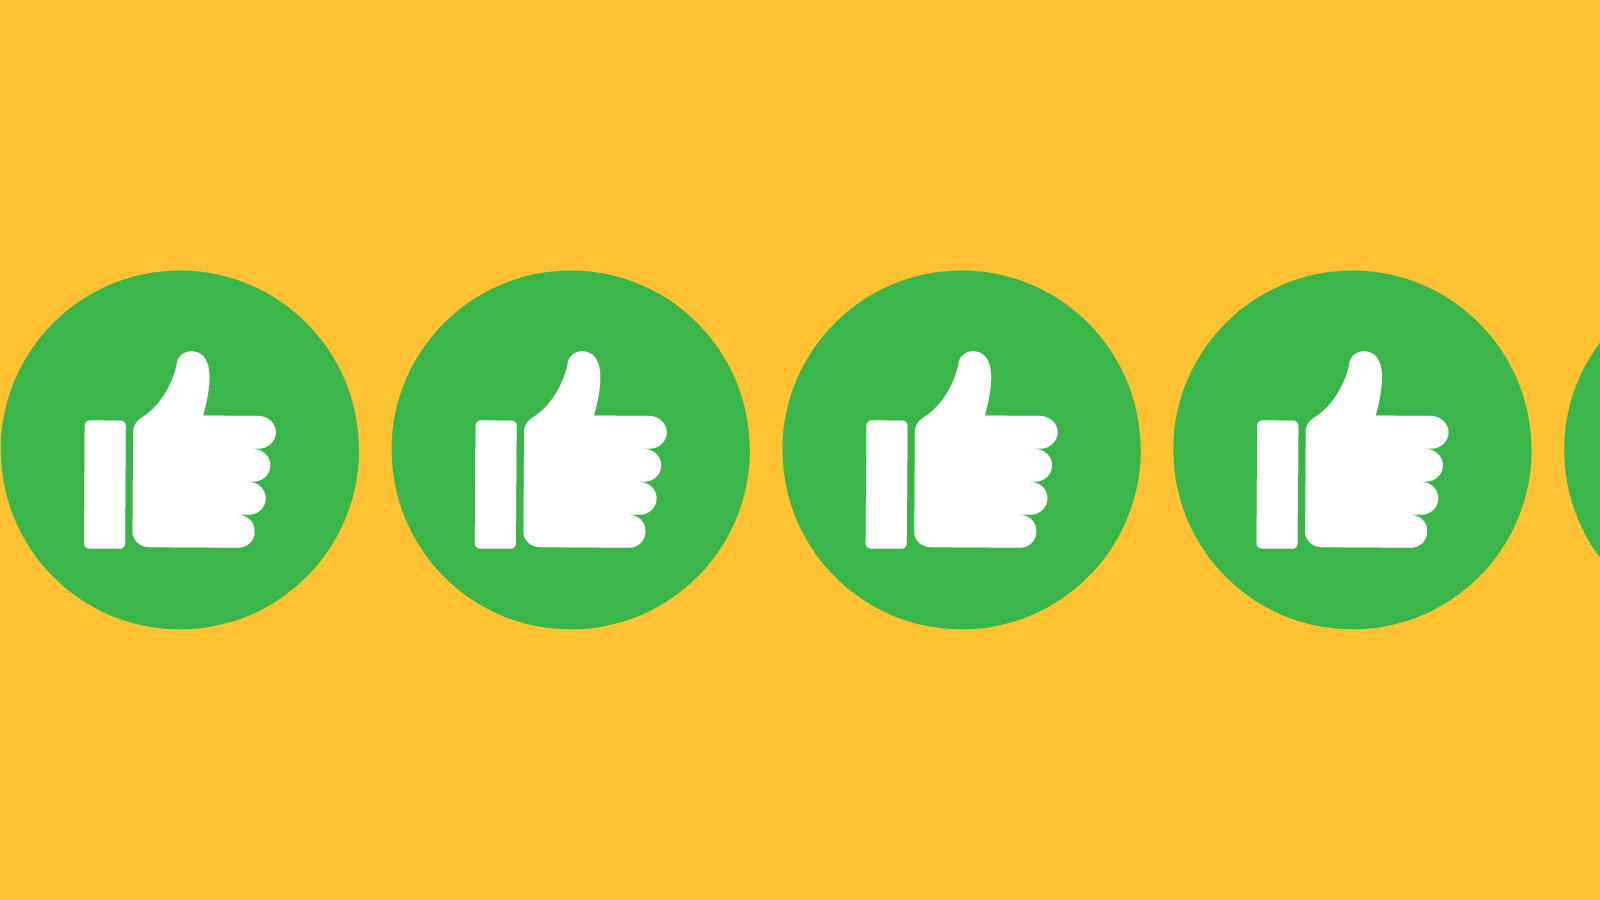 A row of thumbs up icons in green circles